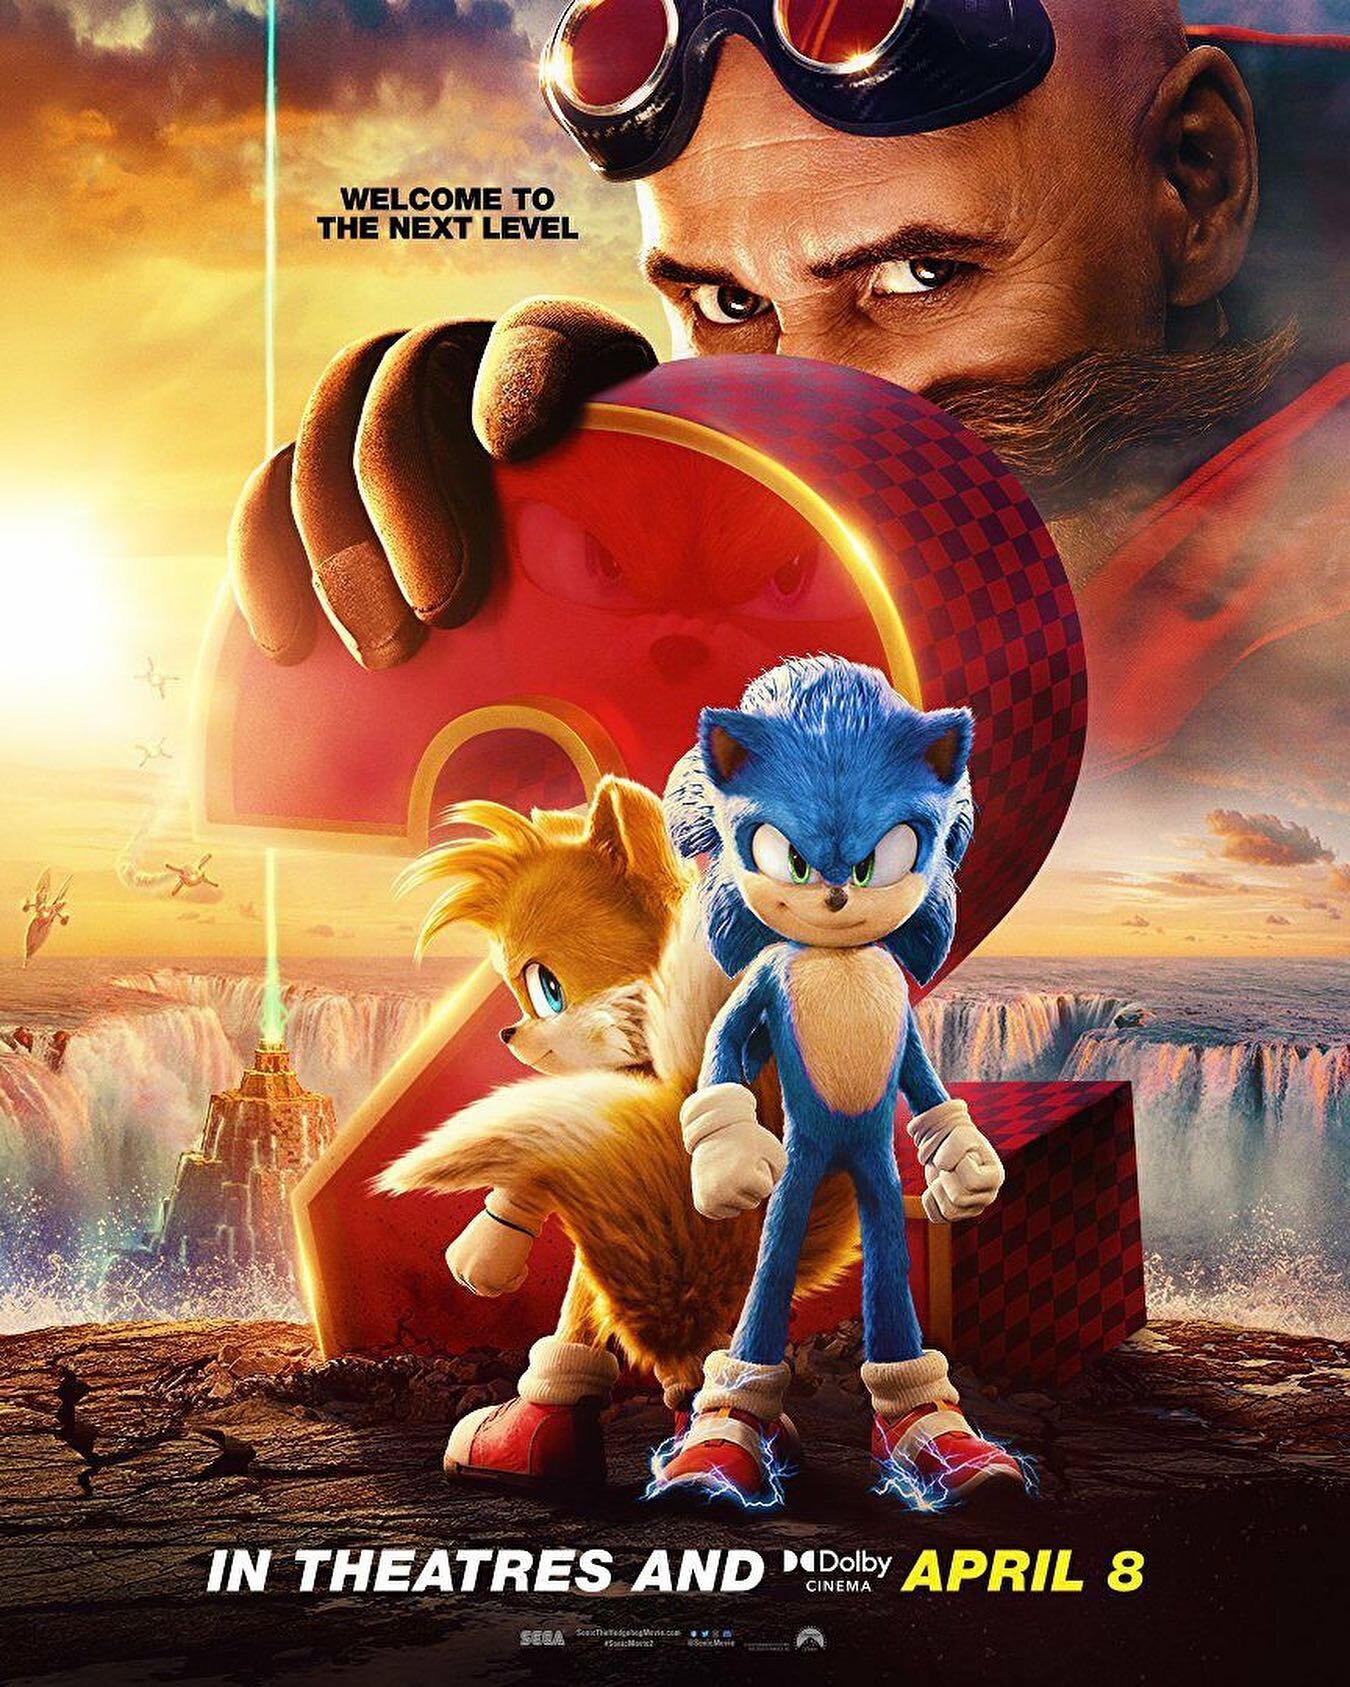 Sonic the Hedgehog 2 review now live! 🦔👊 Check my linktree for the full review 🔗🌳
.
#CollectingAsylum #AsylumReviews #Sonic2 #SonicTheHedgehog2 #Sonic #ParamountPictures @paramountuk @sonicthehedgehog #4K #4KUHD #Bluray #MovieReview #FilmReview #